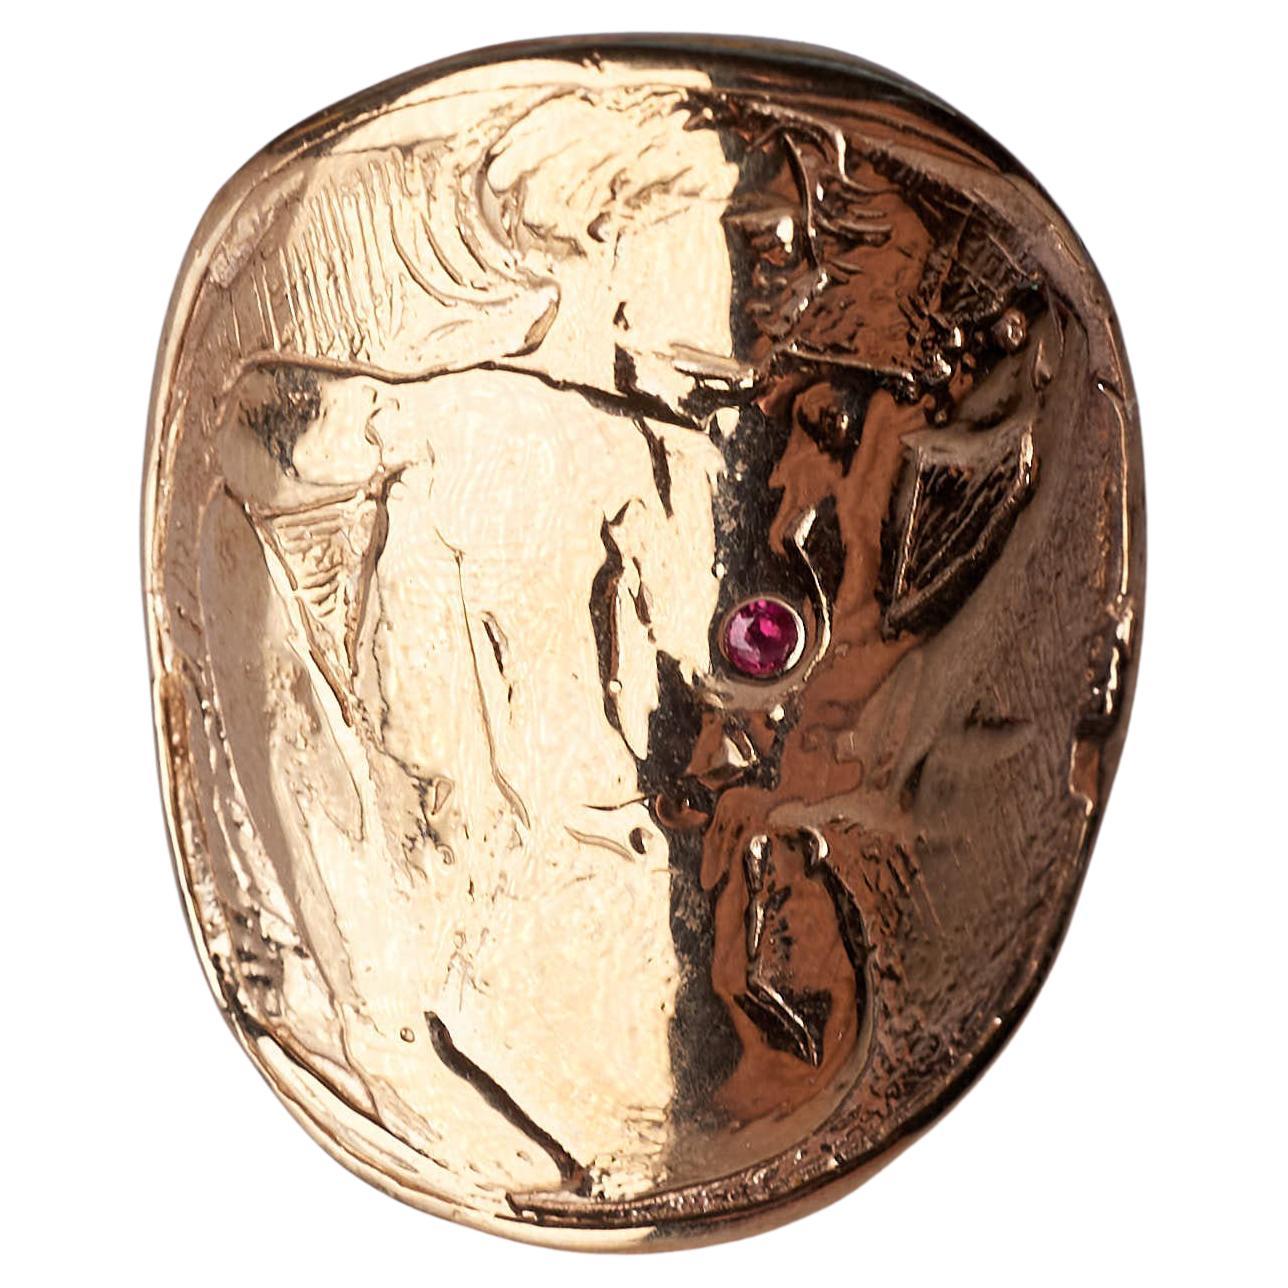 Medal Coin Ring Woman Holding a Mask,  Ruby Cocktail Ring  J Dauphin

J DAUPHIN 